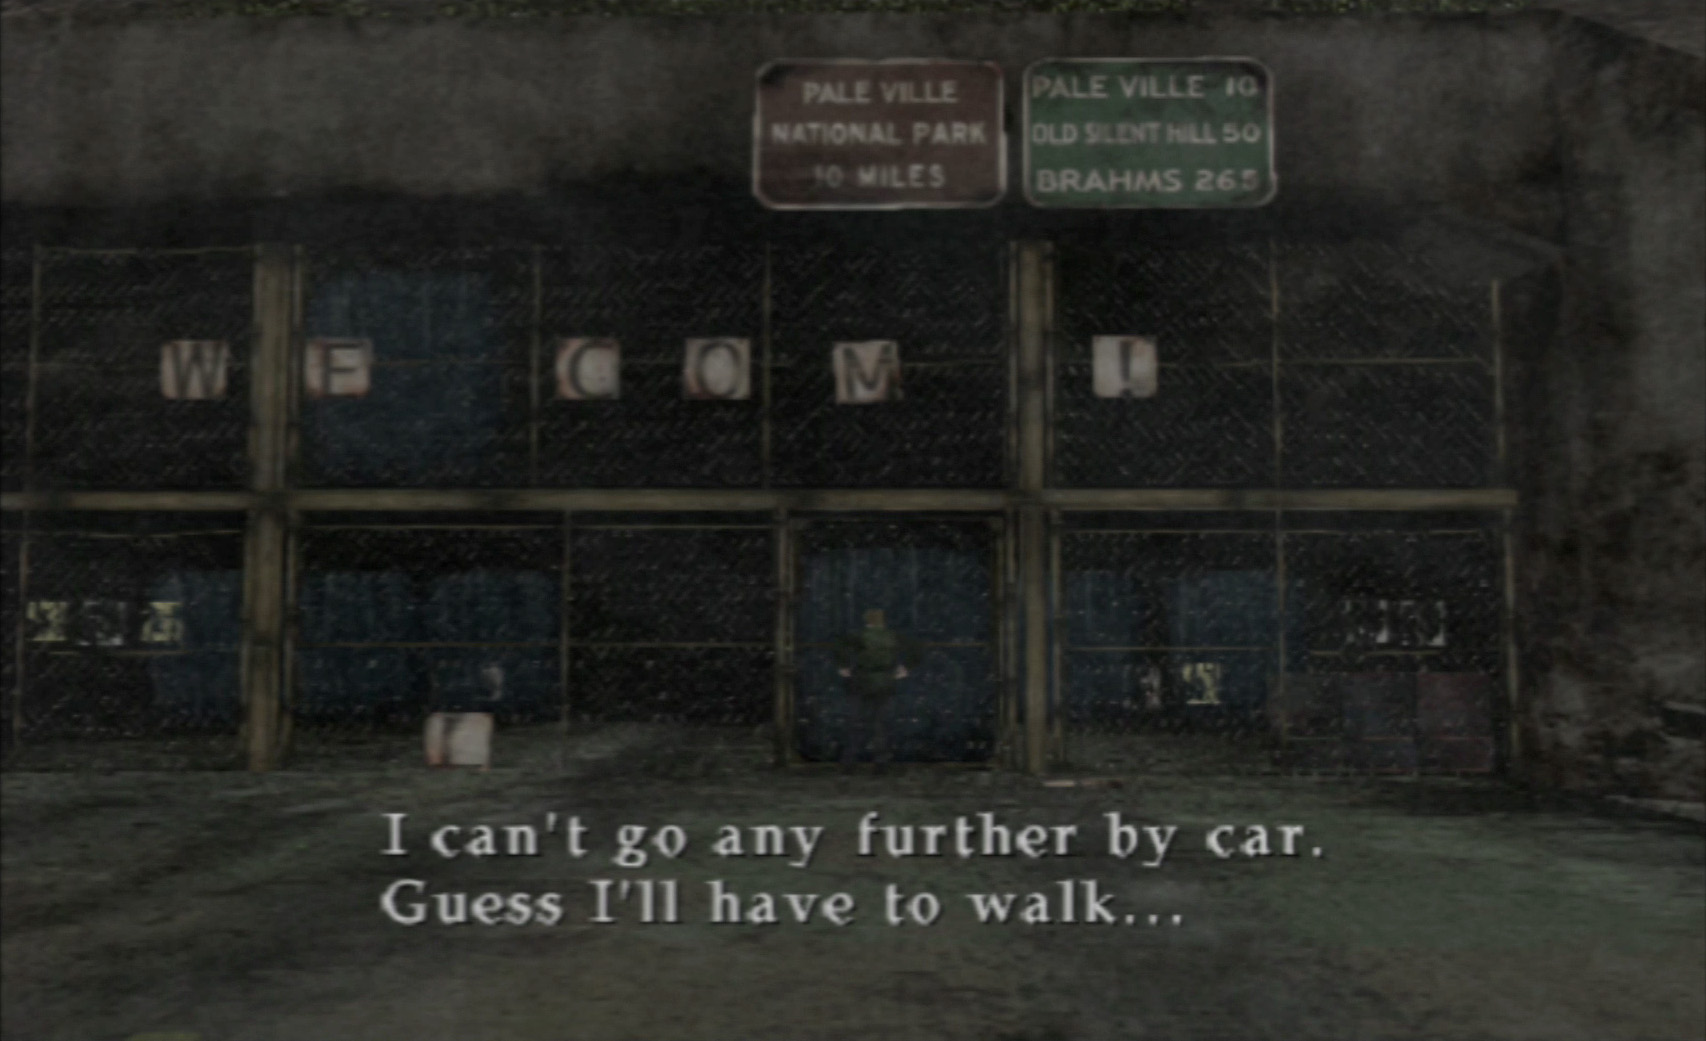 Silent Hill 2 For Mac